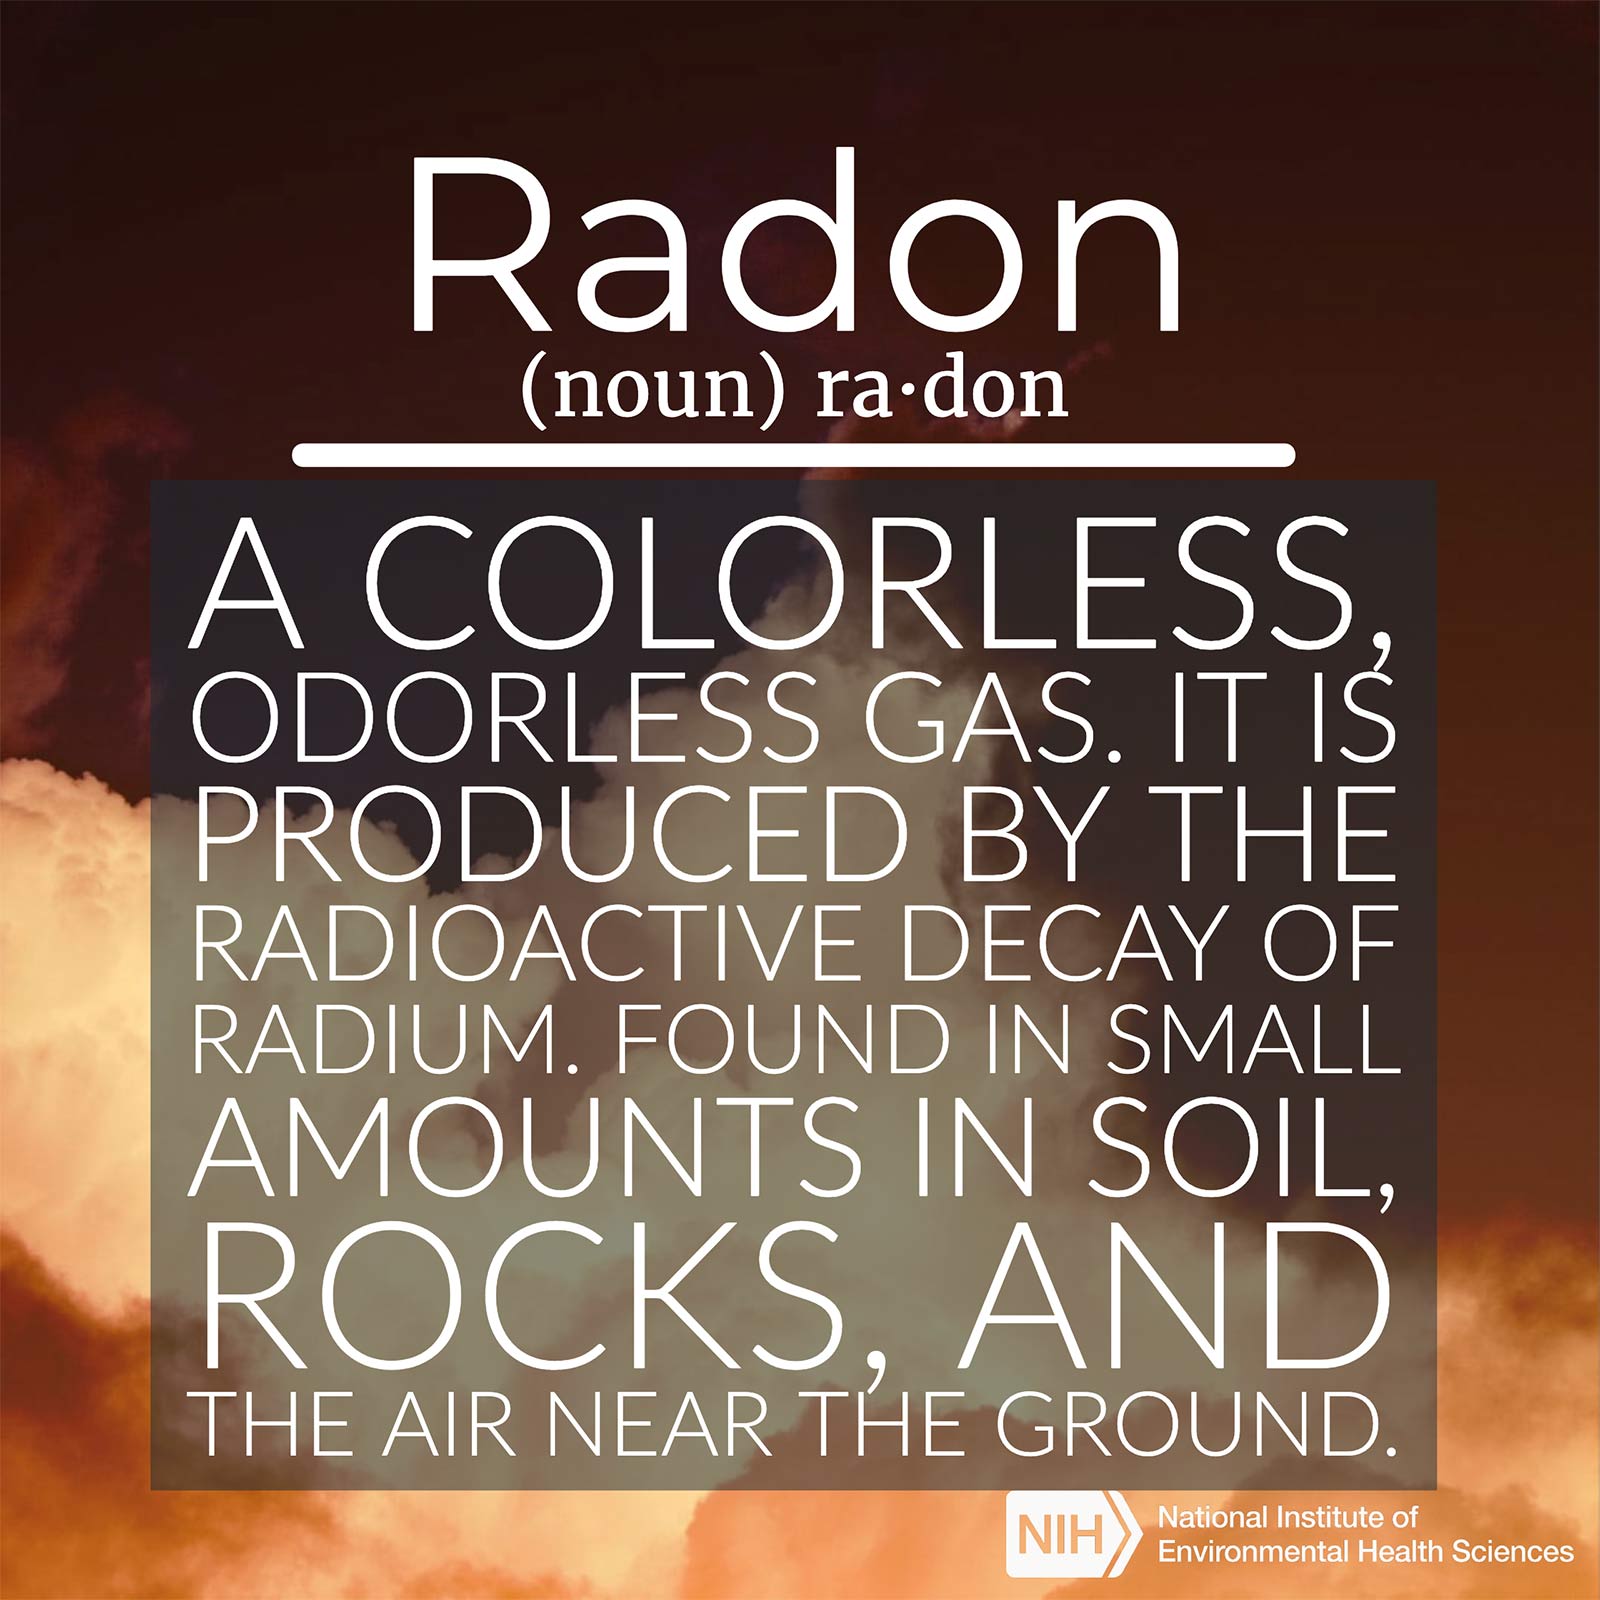 Radon (noun) defined as 'a colorless, odorless gas. It is produced by the radioactive decay of radium. Found in small amounts in soil, rocks, and the air near the ground.'